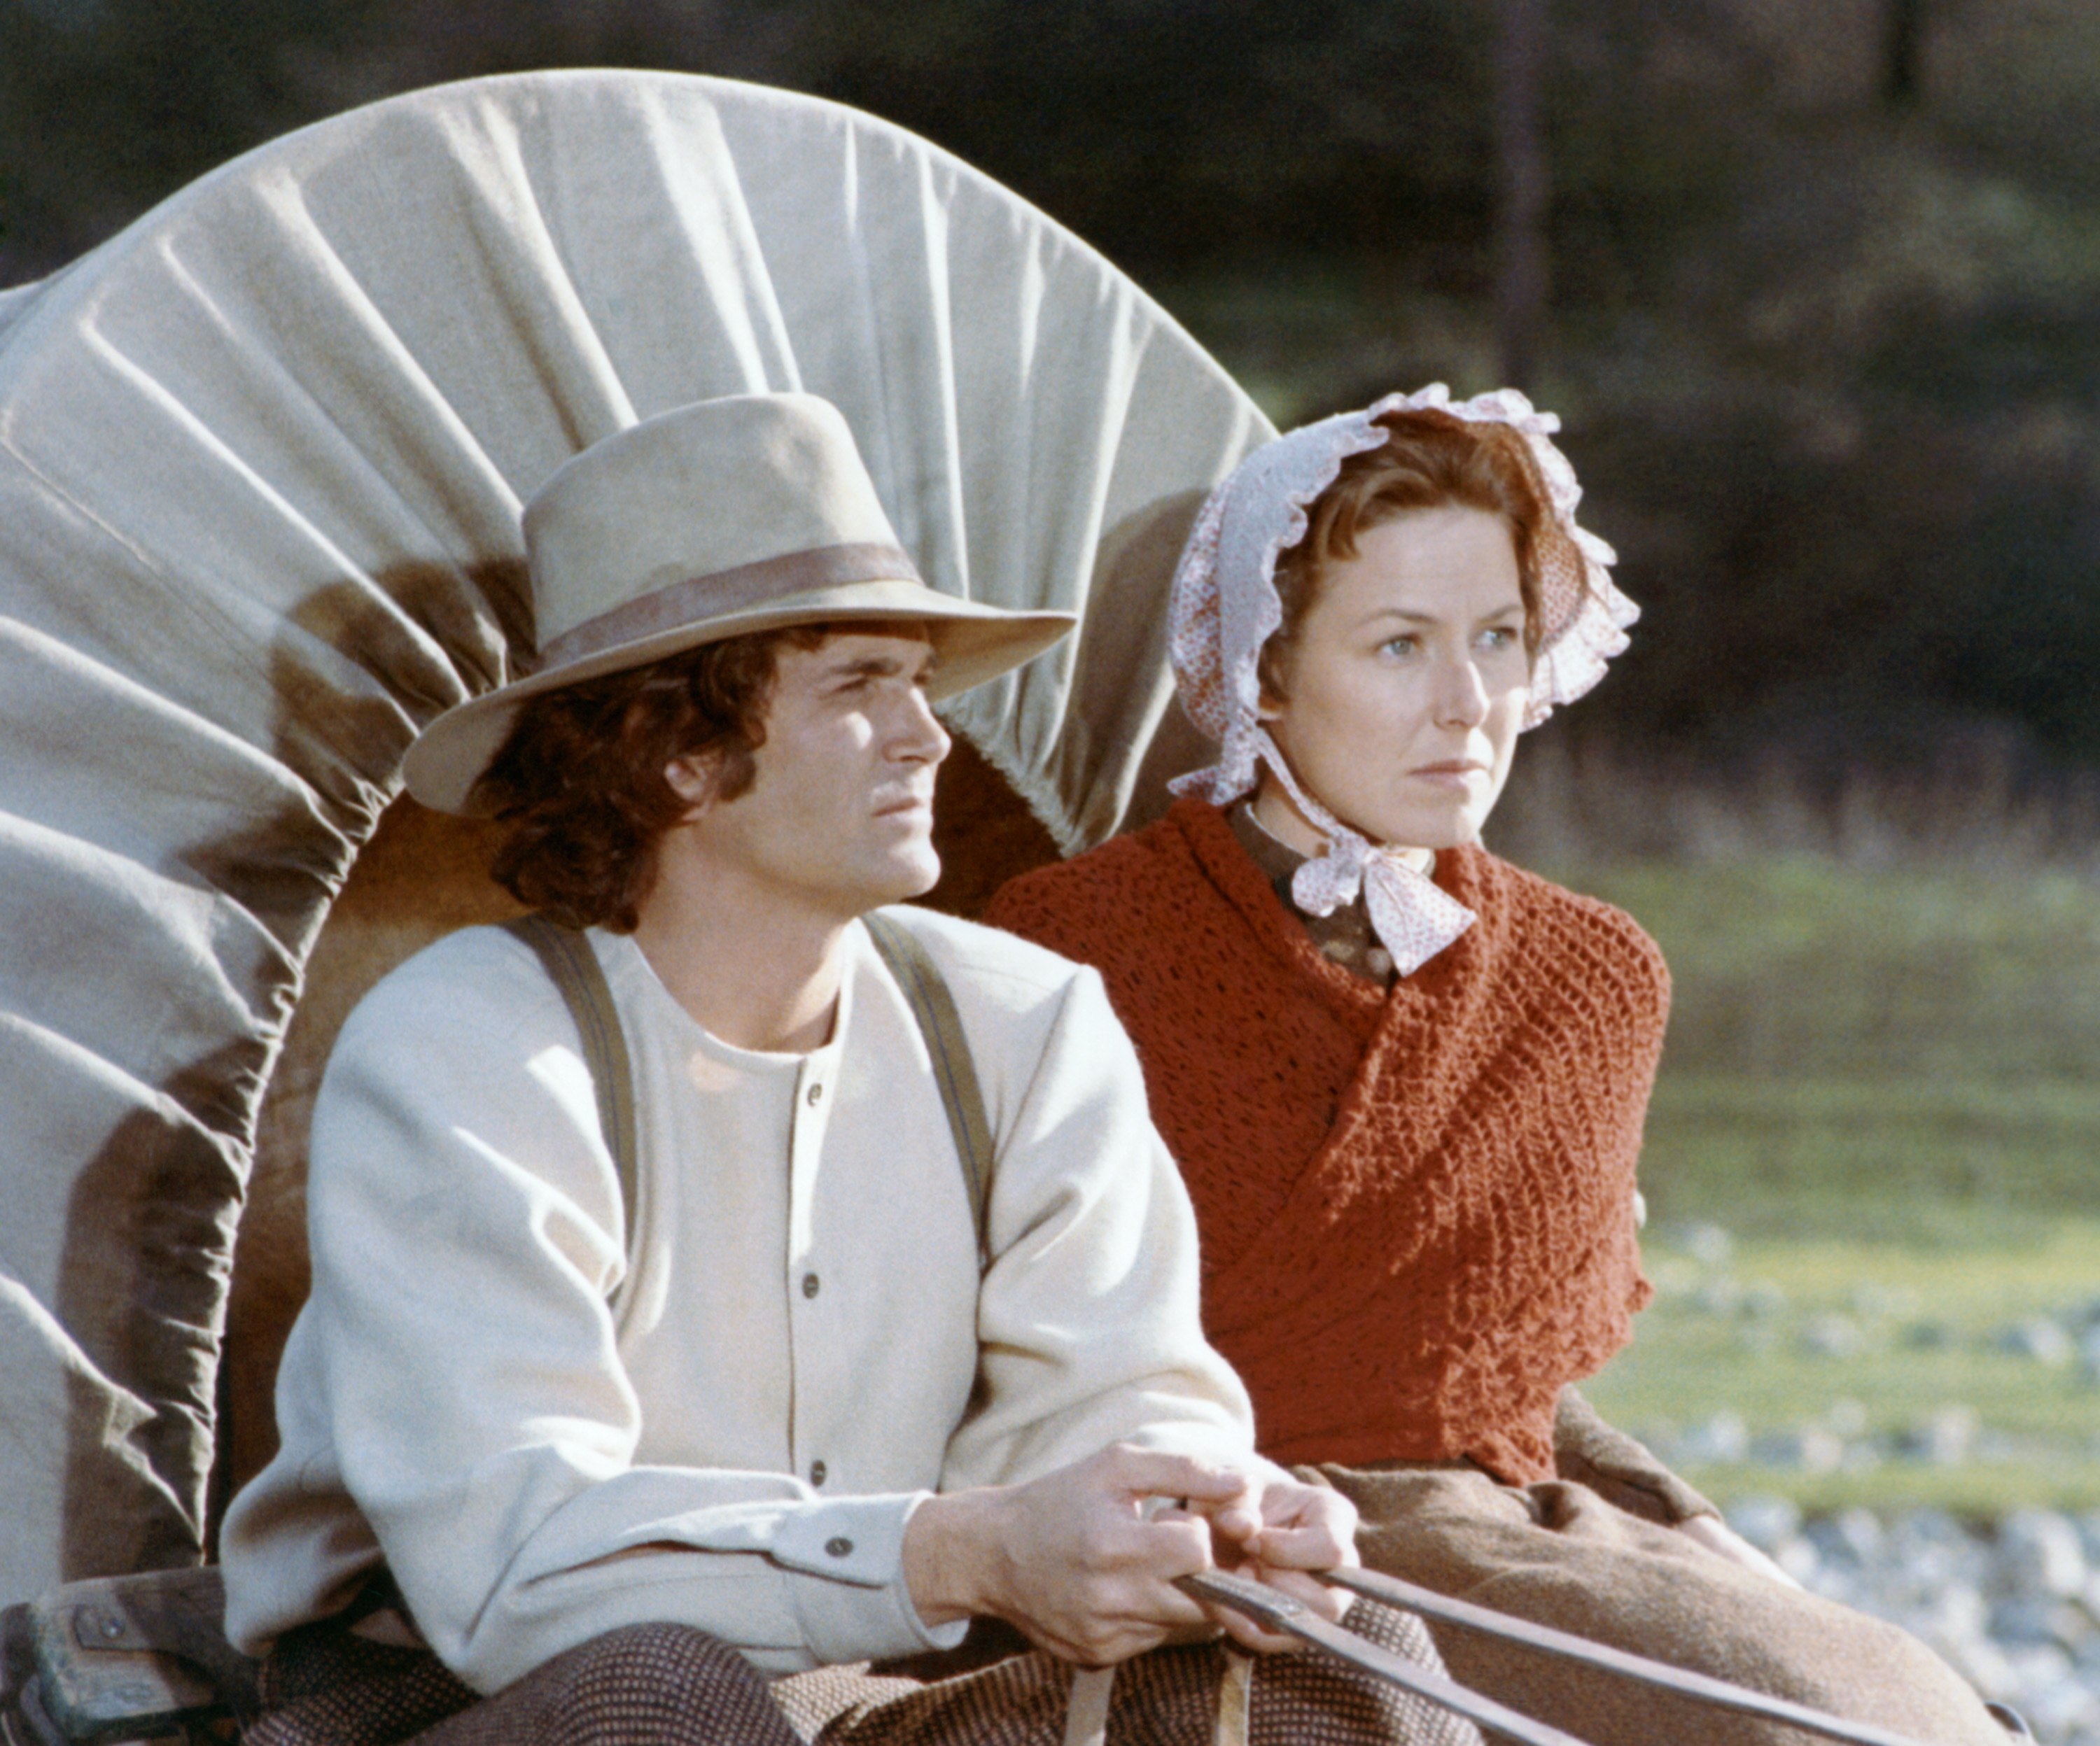 Michael Landon and Karen Grassle sit in a wagon during a scene from 'Little House on the Prairie'